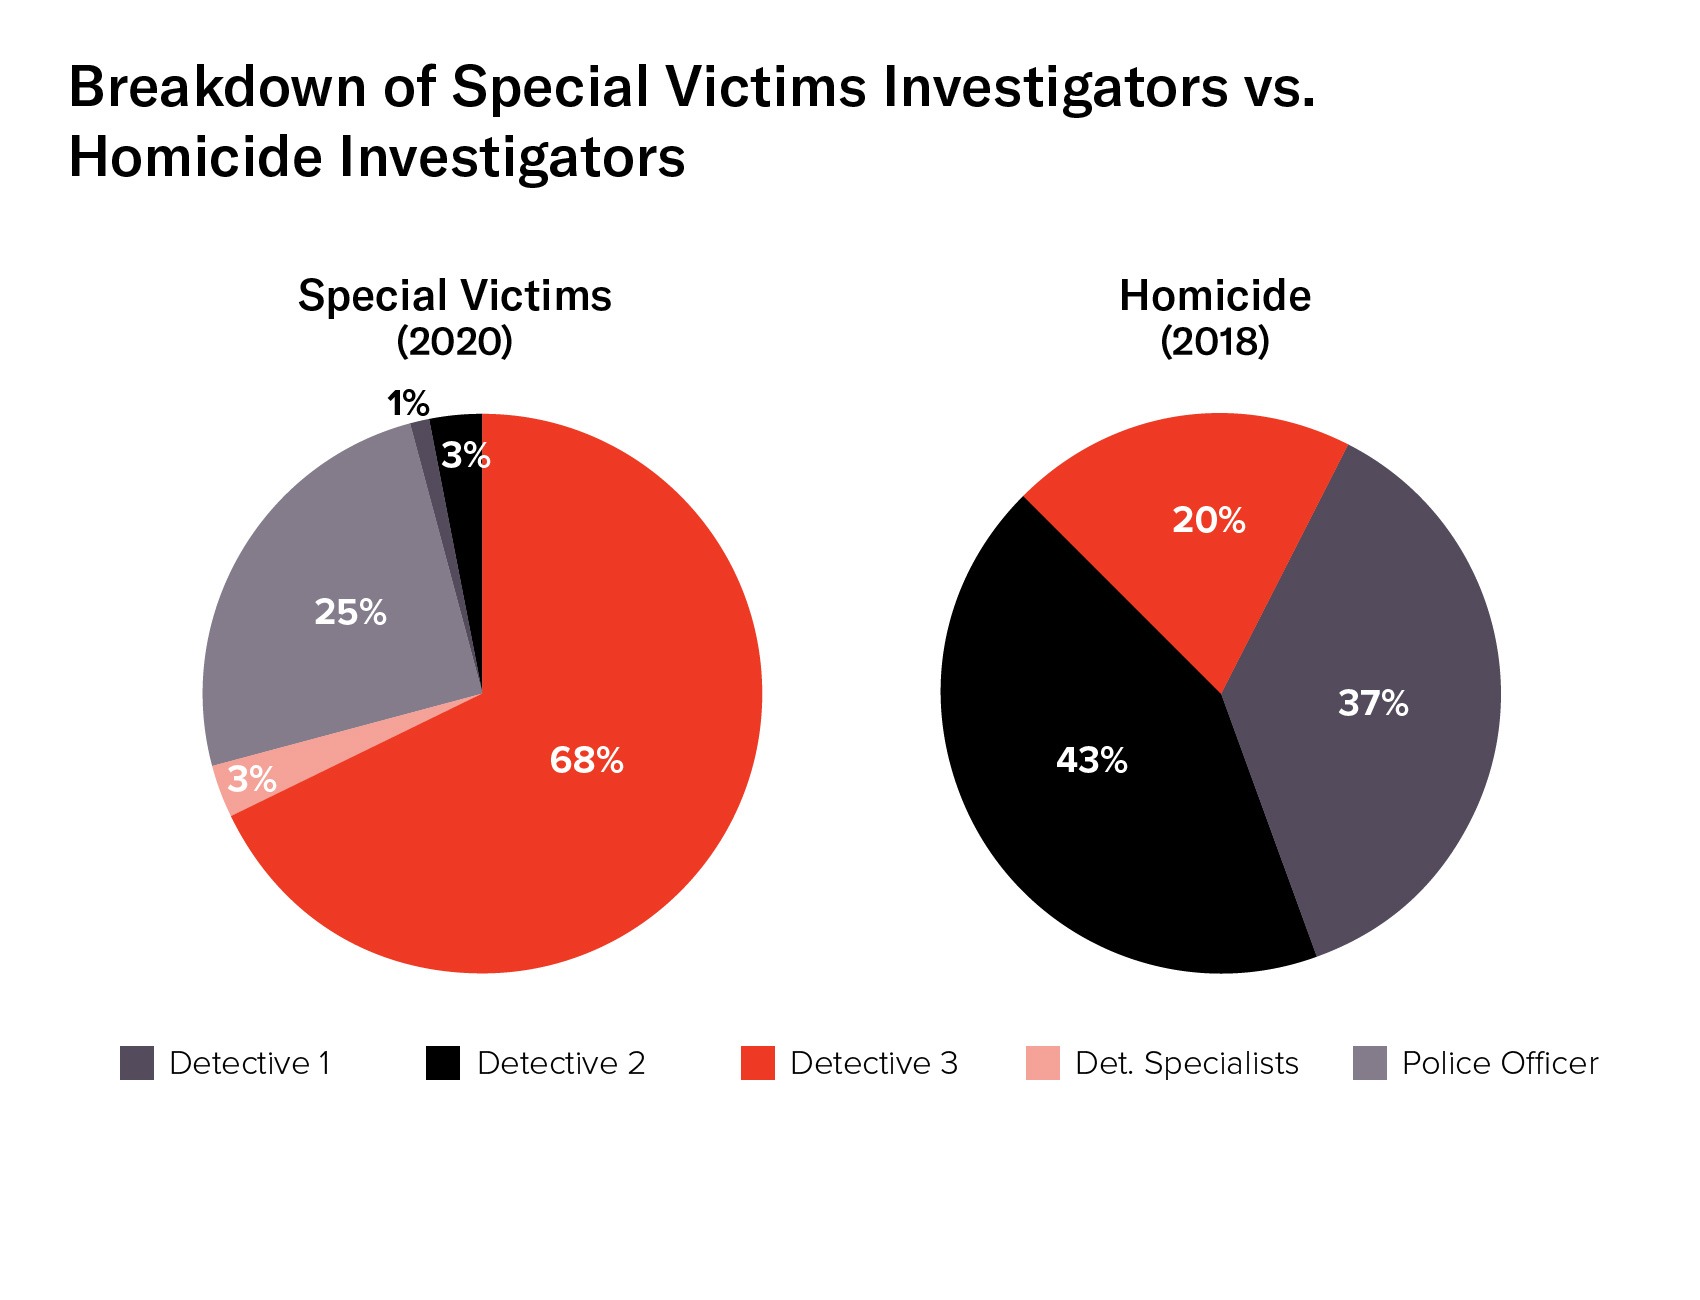 Pie chart showing that the NYPD homicide division has more experienced officers than the special victims division.